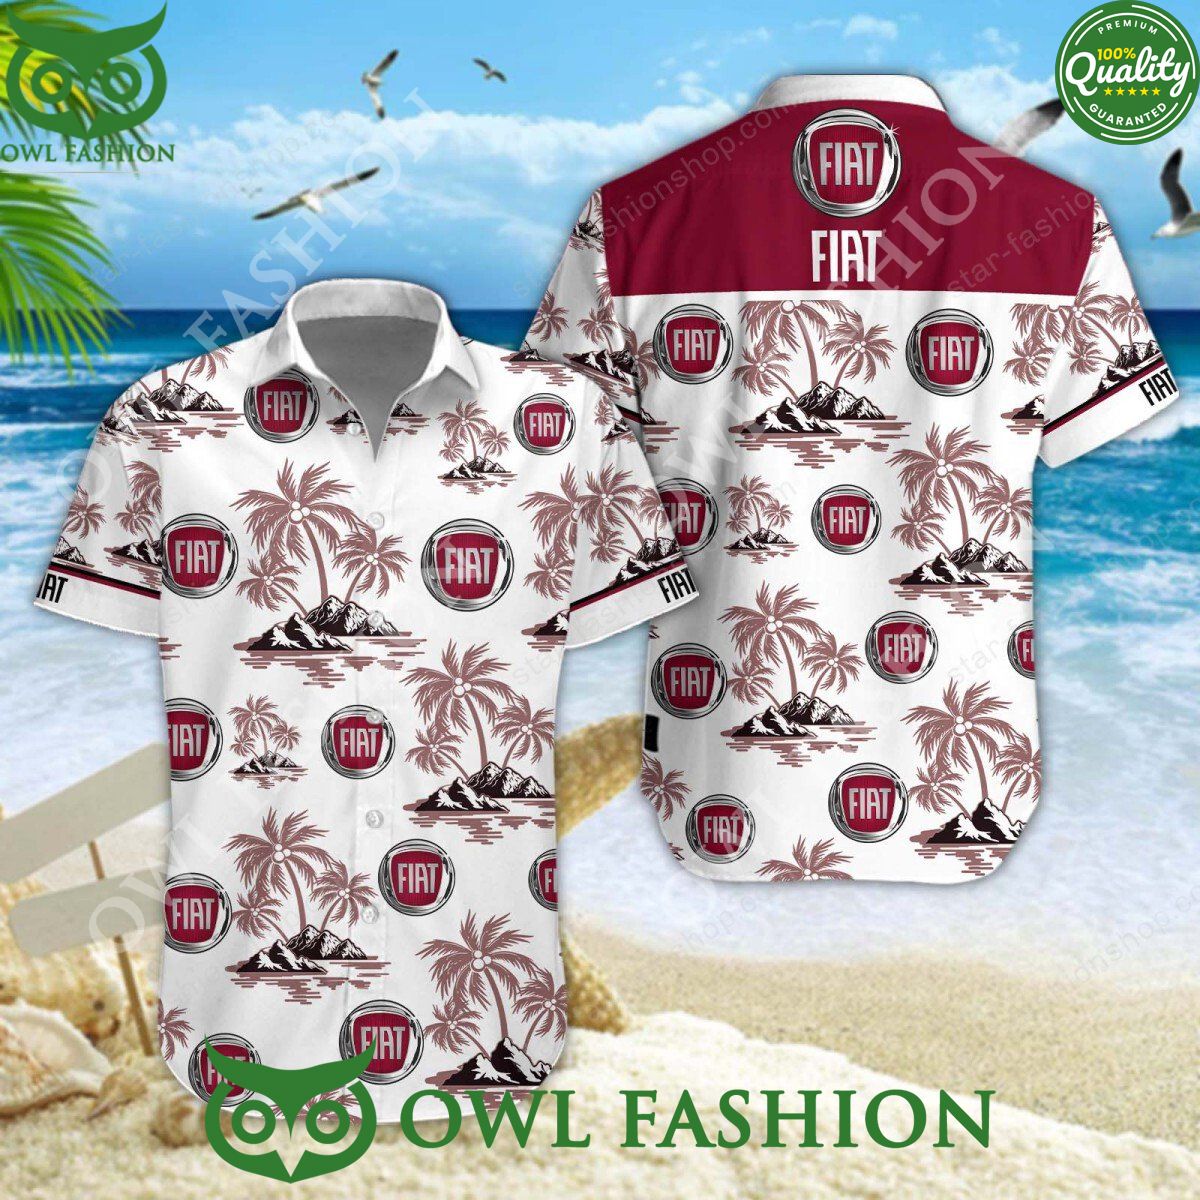 Fiat Italy Automobile Largest Hawaiian Shirt and Short Cutting dash